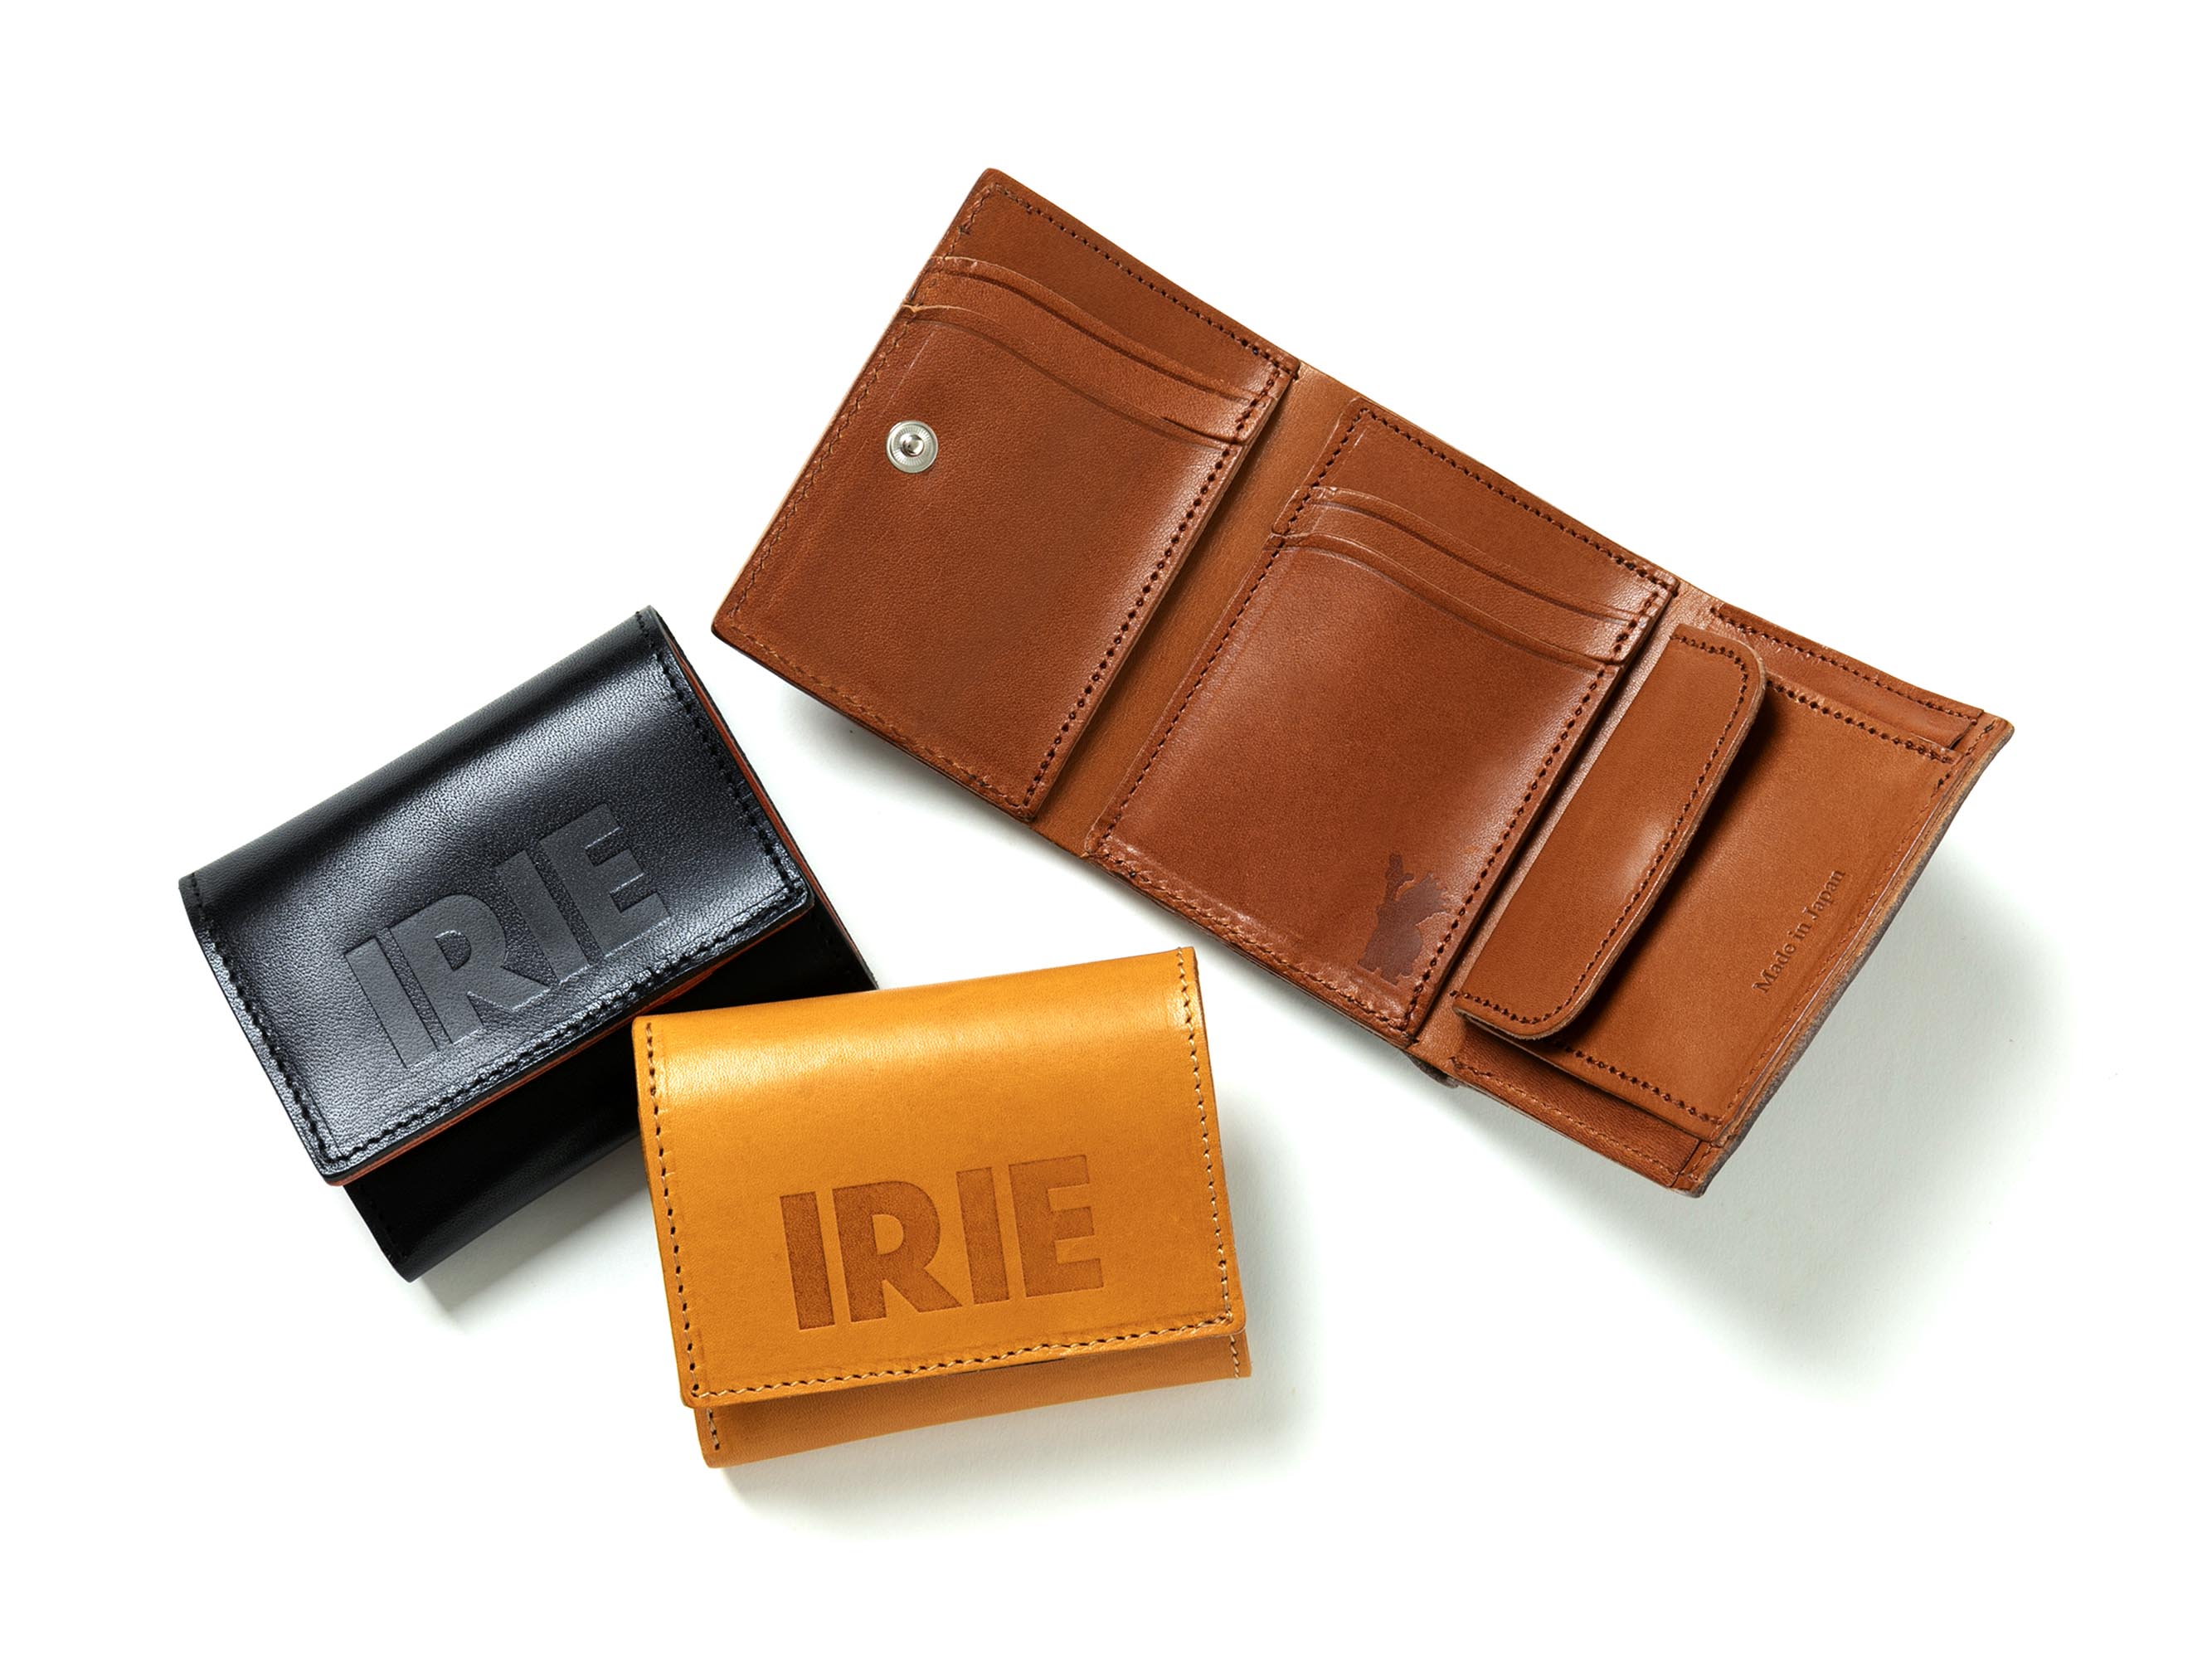 LEATHER WALLET - IRIE by irielife